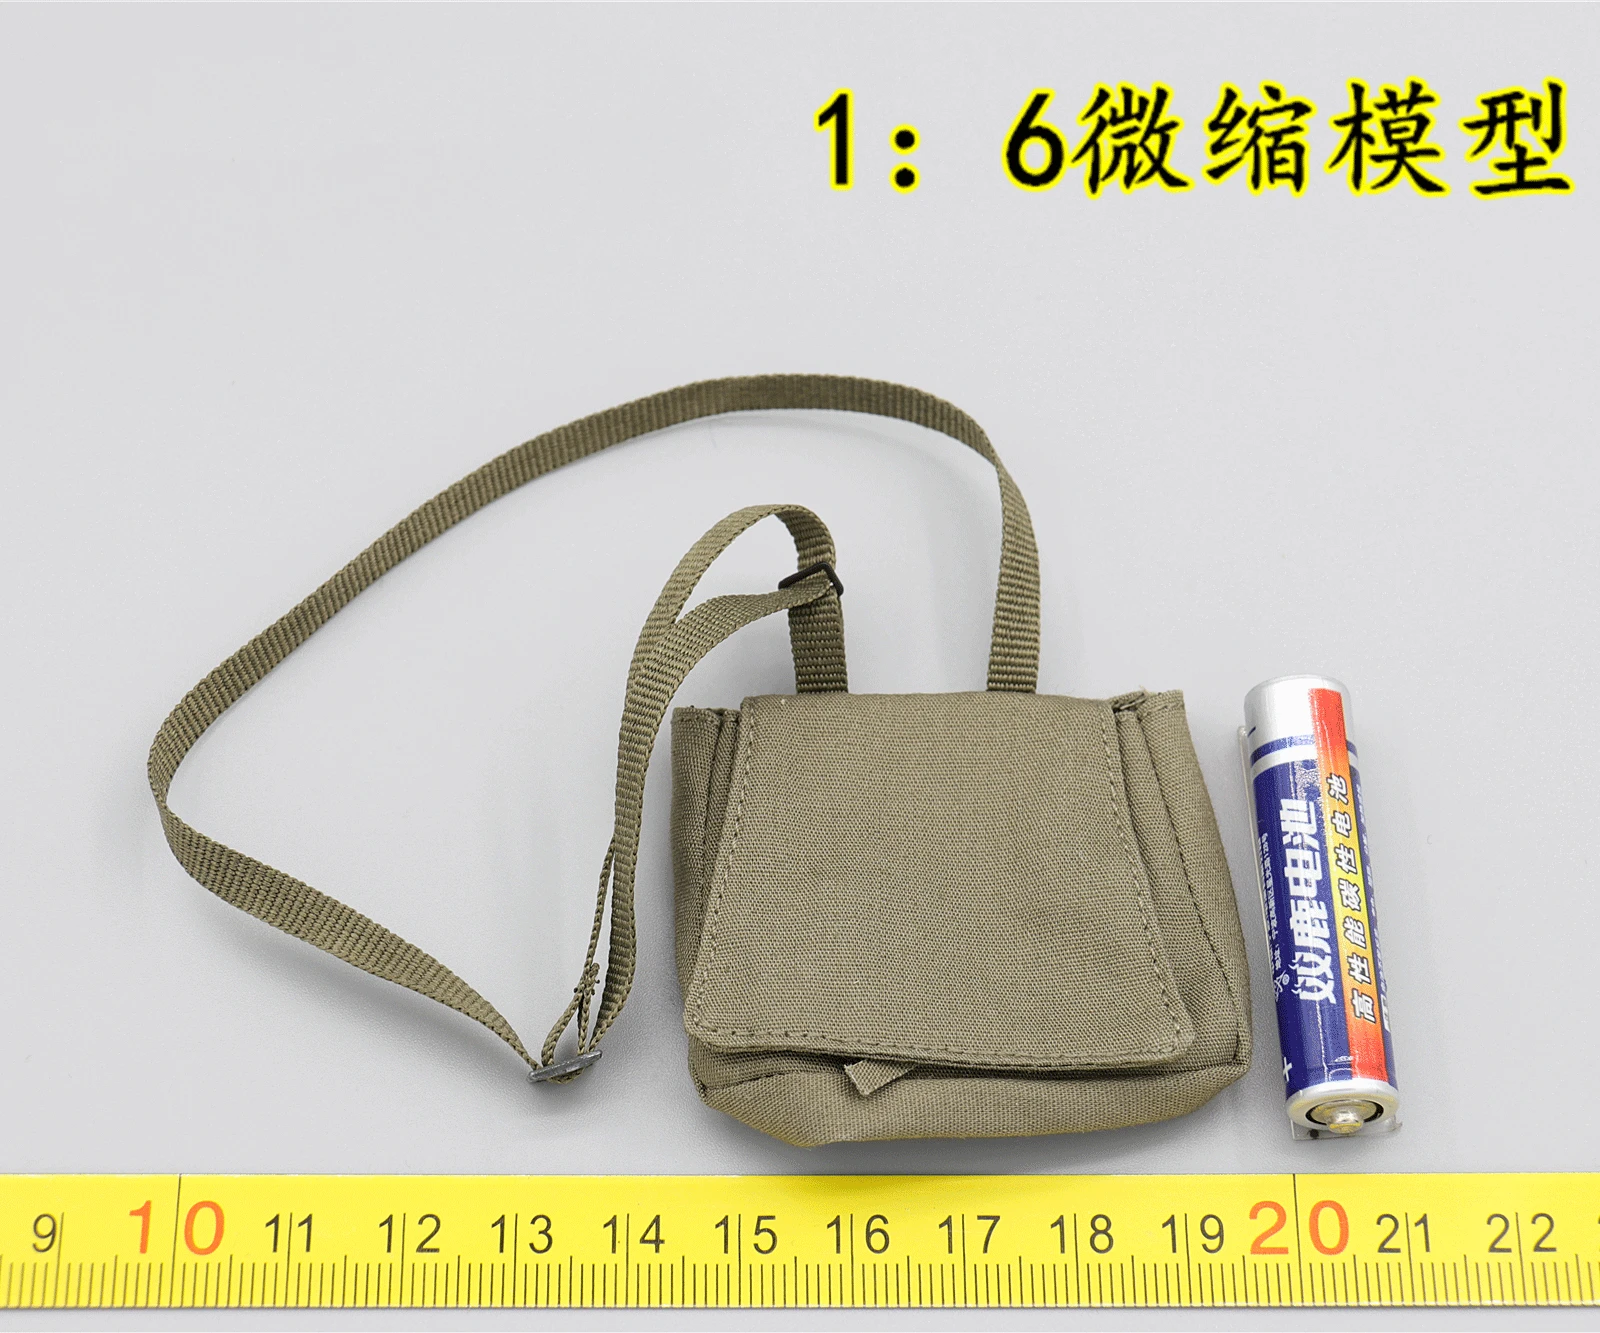 

CHN-028A Insurrectional Army Soldier 1/6 Scale Satchel Model